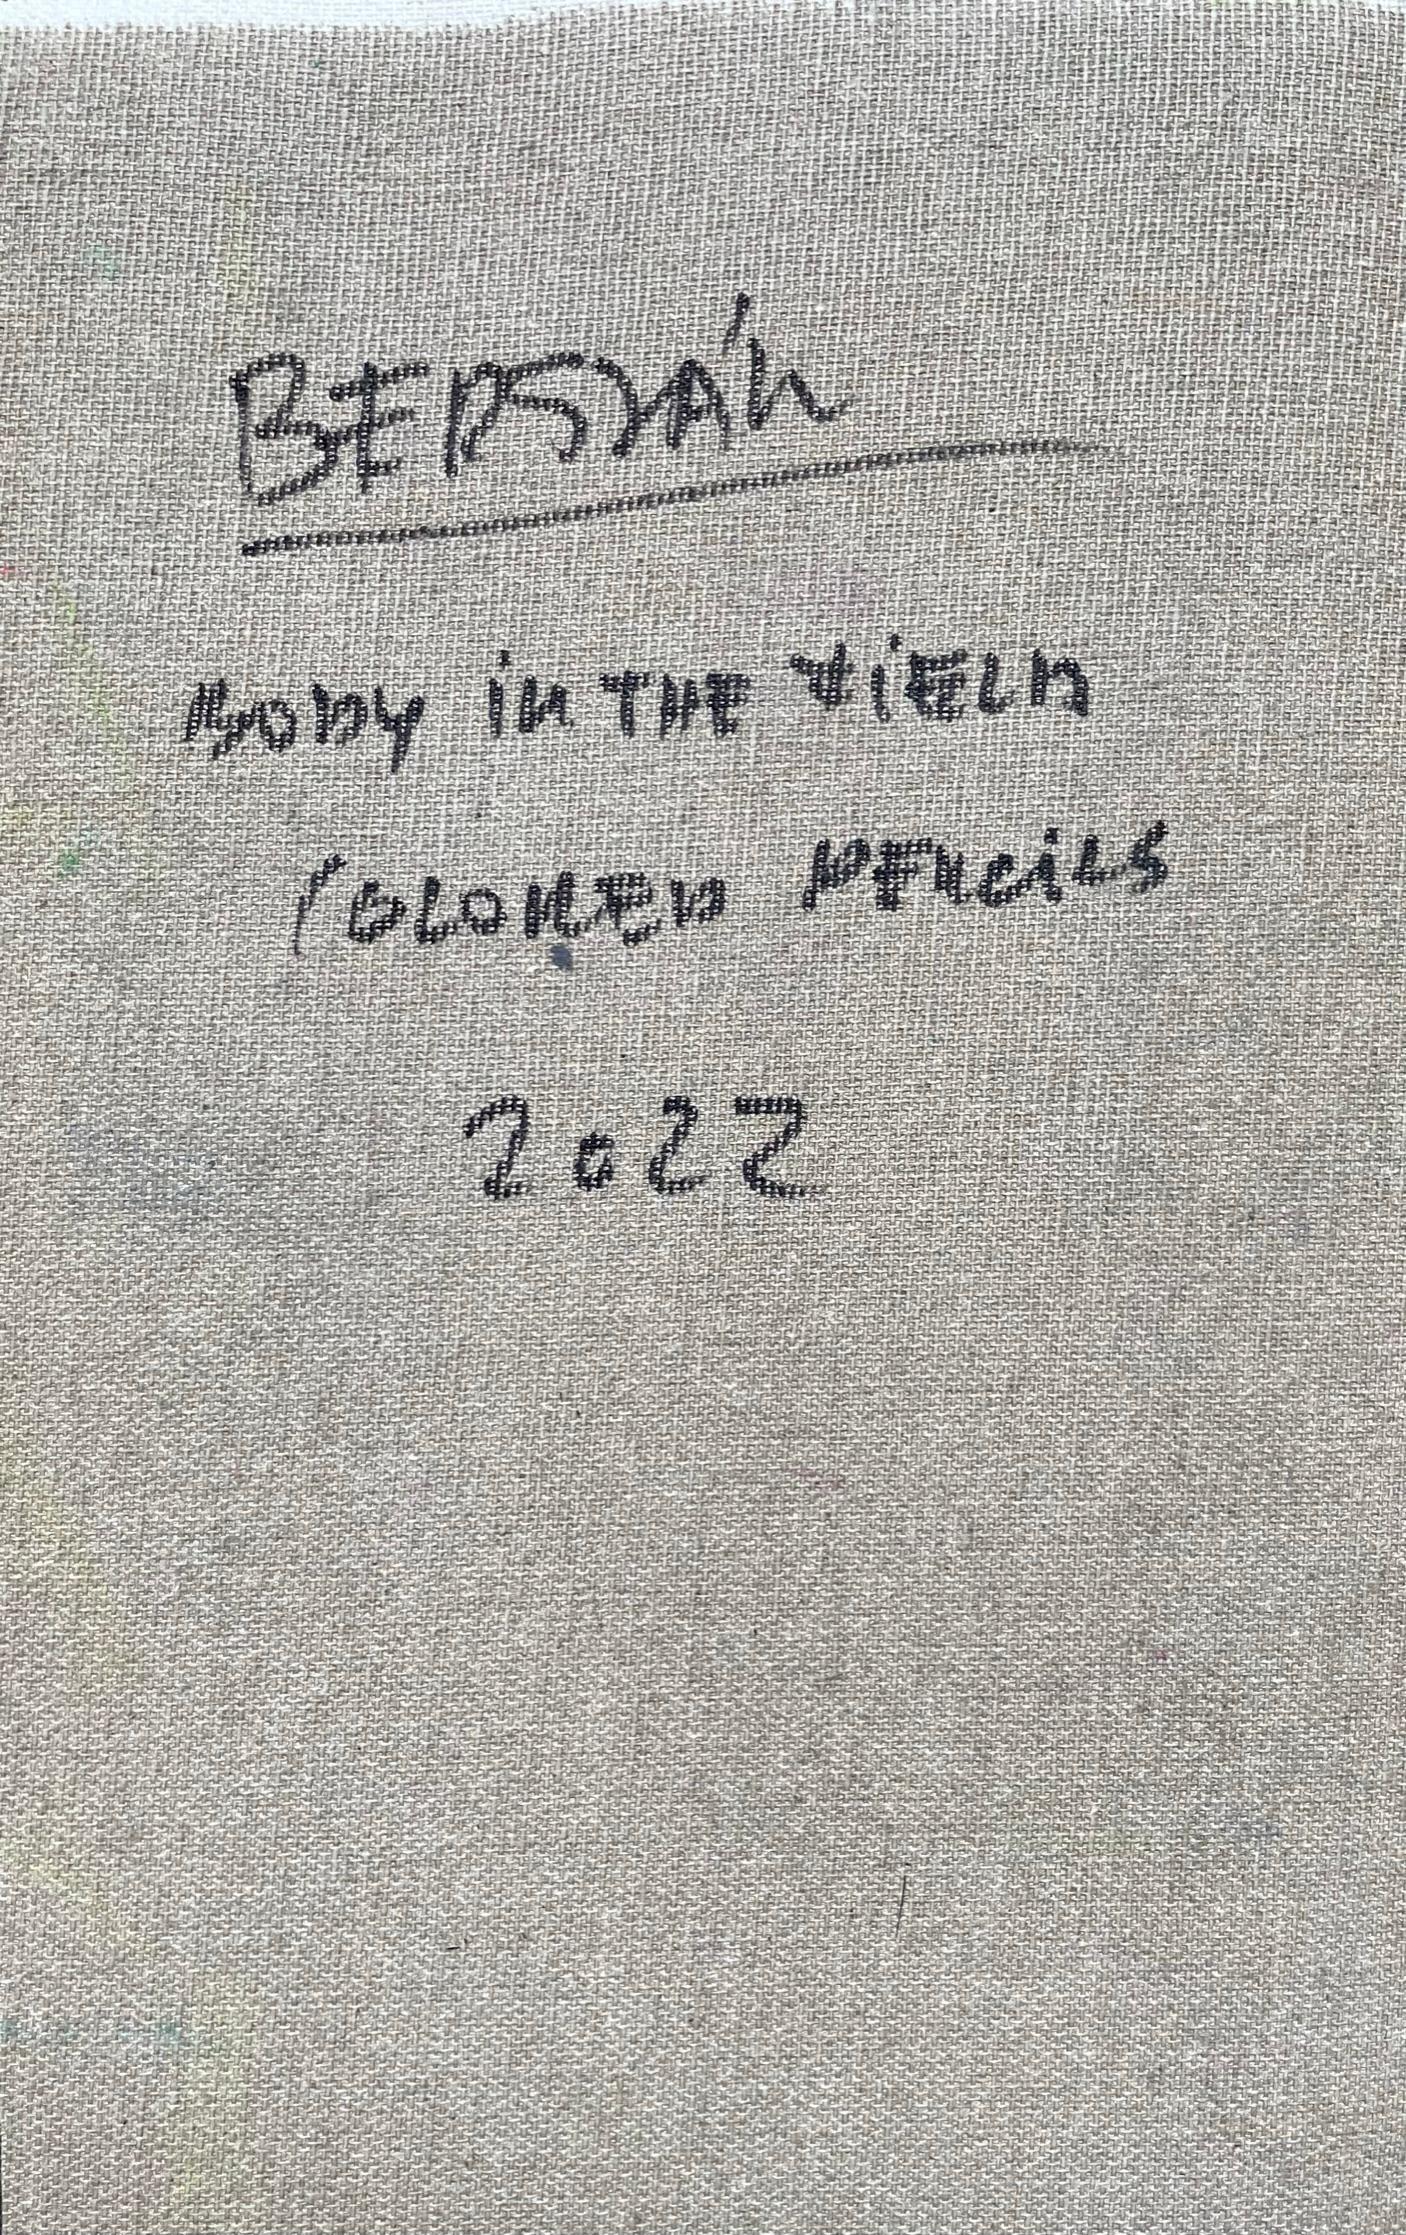 Body in the Field #5, 2022
coloured pencils on canvas

25 H x 16 W cm

Signed on reverse

Zsolt Berszán embodies in his works the dissolution of the human body through the prism of the fragment, the body in pieces, and the skeletal carcass. It is